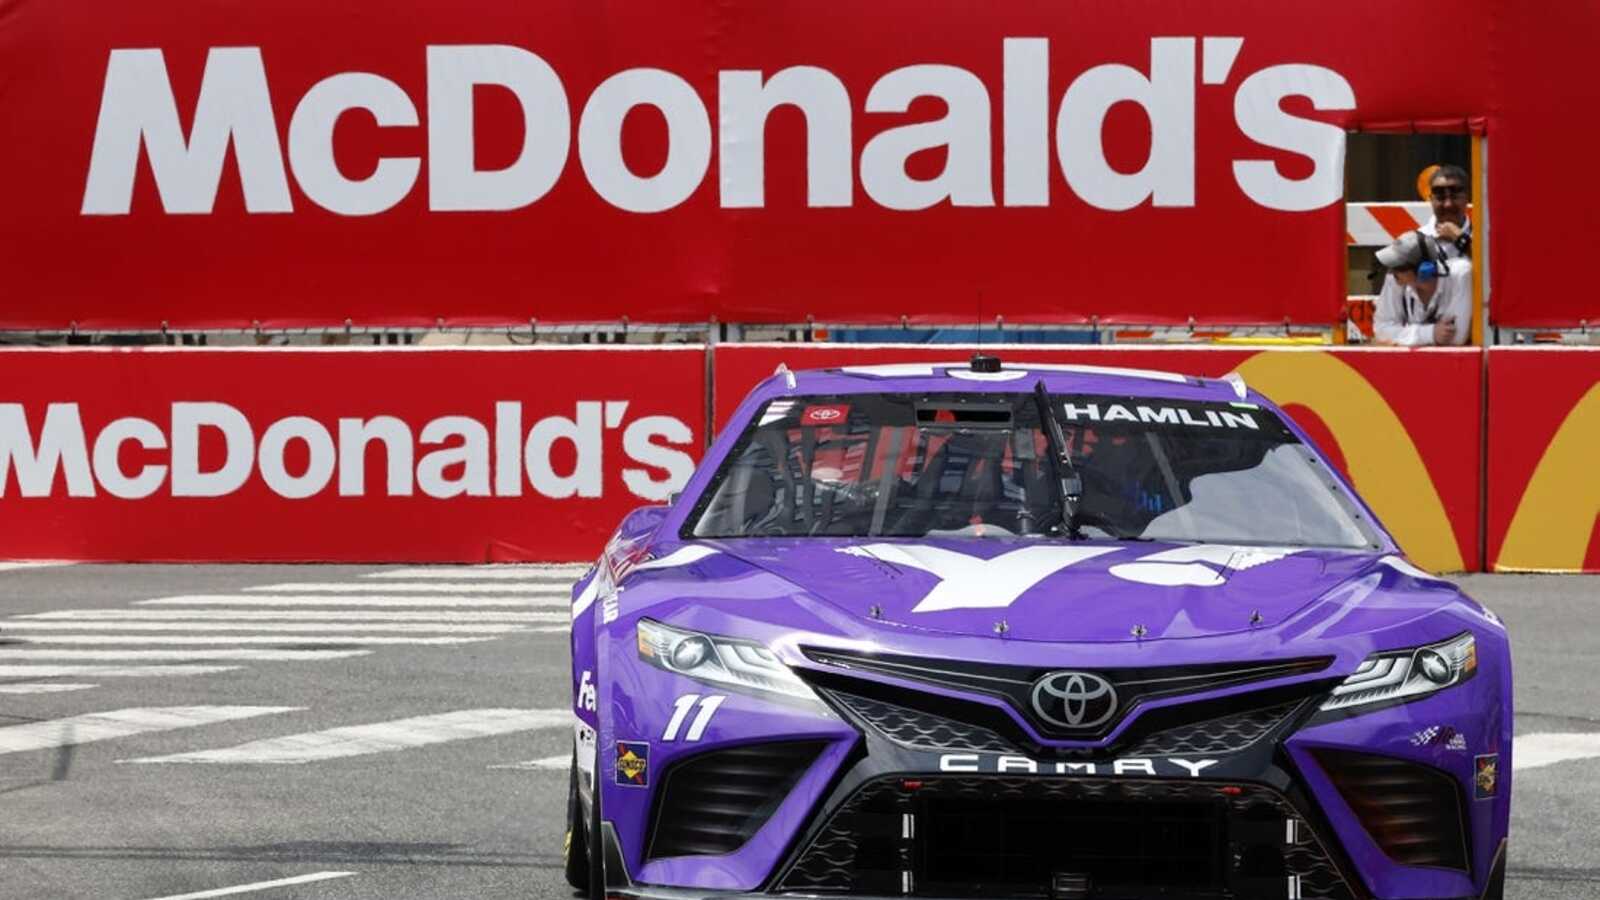 Denny Hamlin earns pole with late charge at Chicago